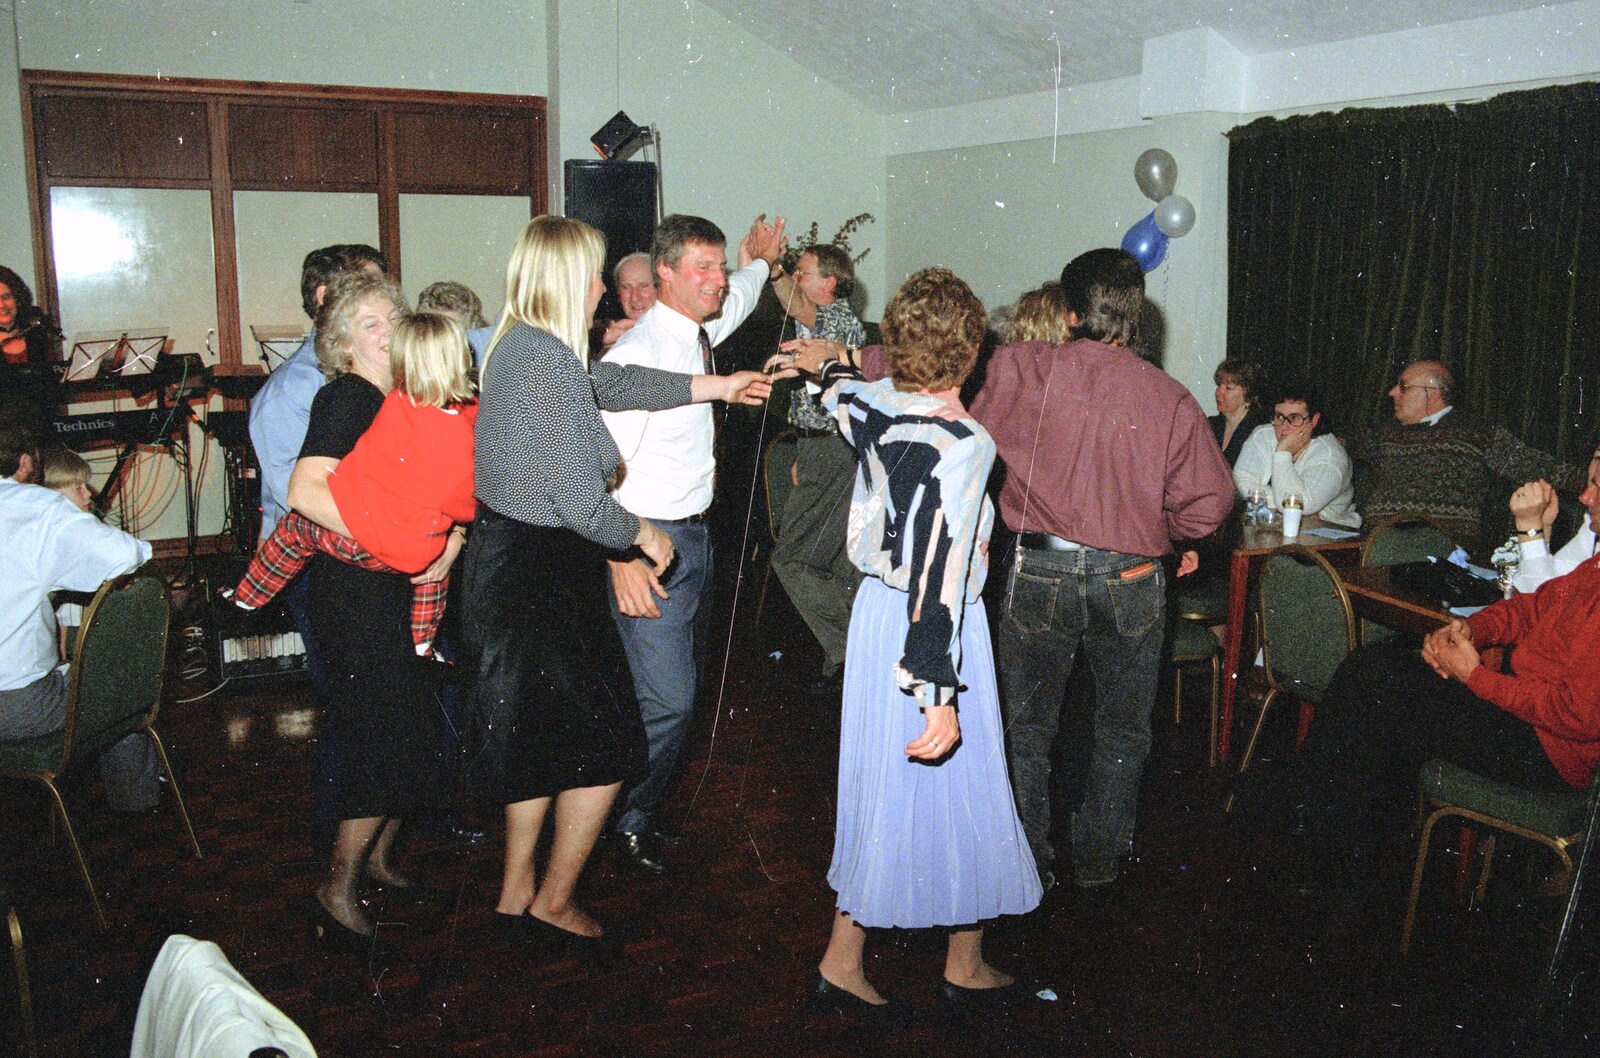 Geoff, Brenda and Sue do Ceilidh dancing from Bernie's Anniversary and Charlie's Wedding, Palgrave and Oakley, Suffolk - 19th July 1994